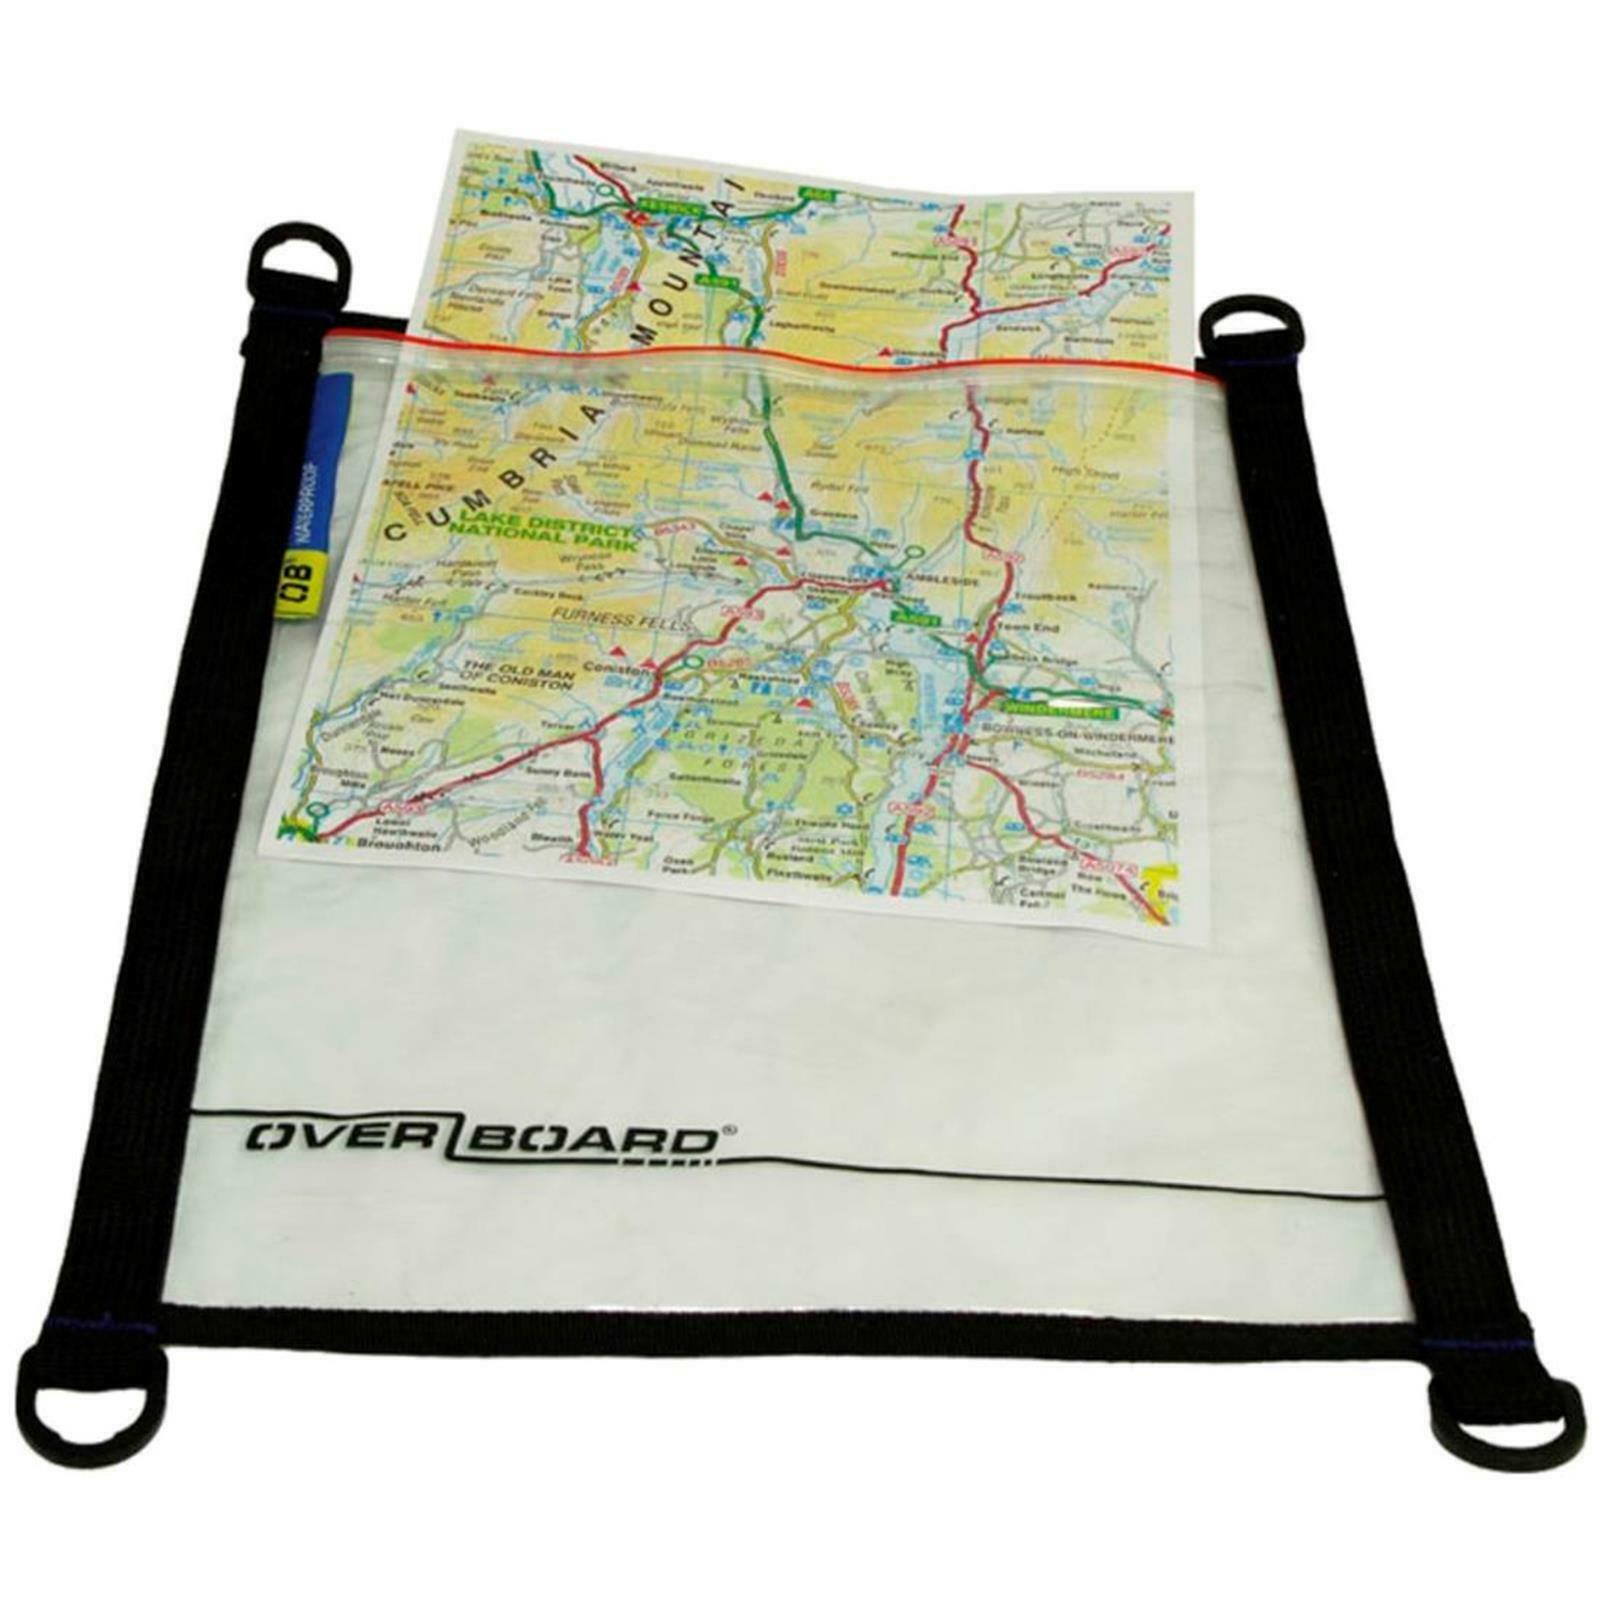 Overboard Waterproof Document Case A4 Case Bag Map Ob1081blk